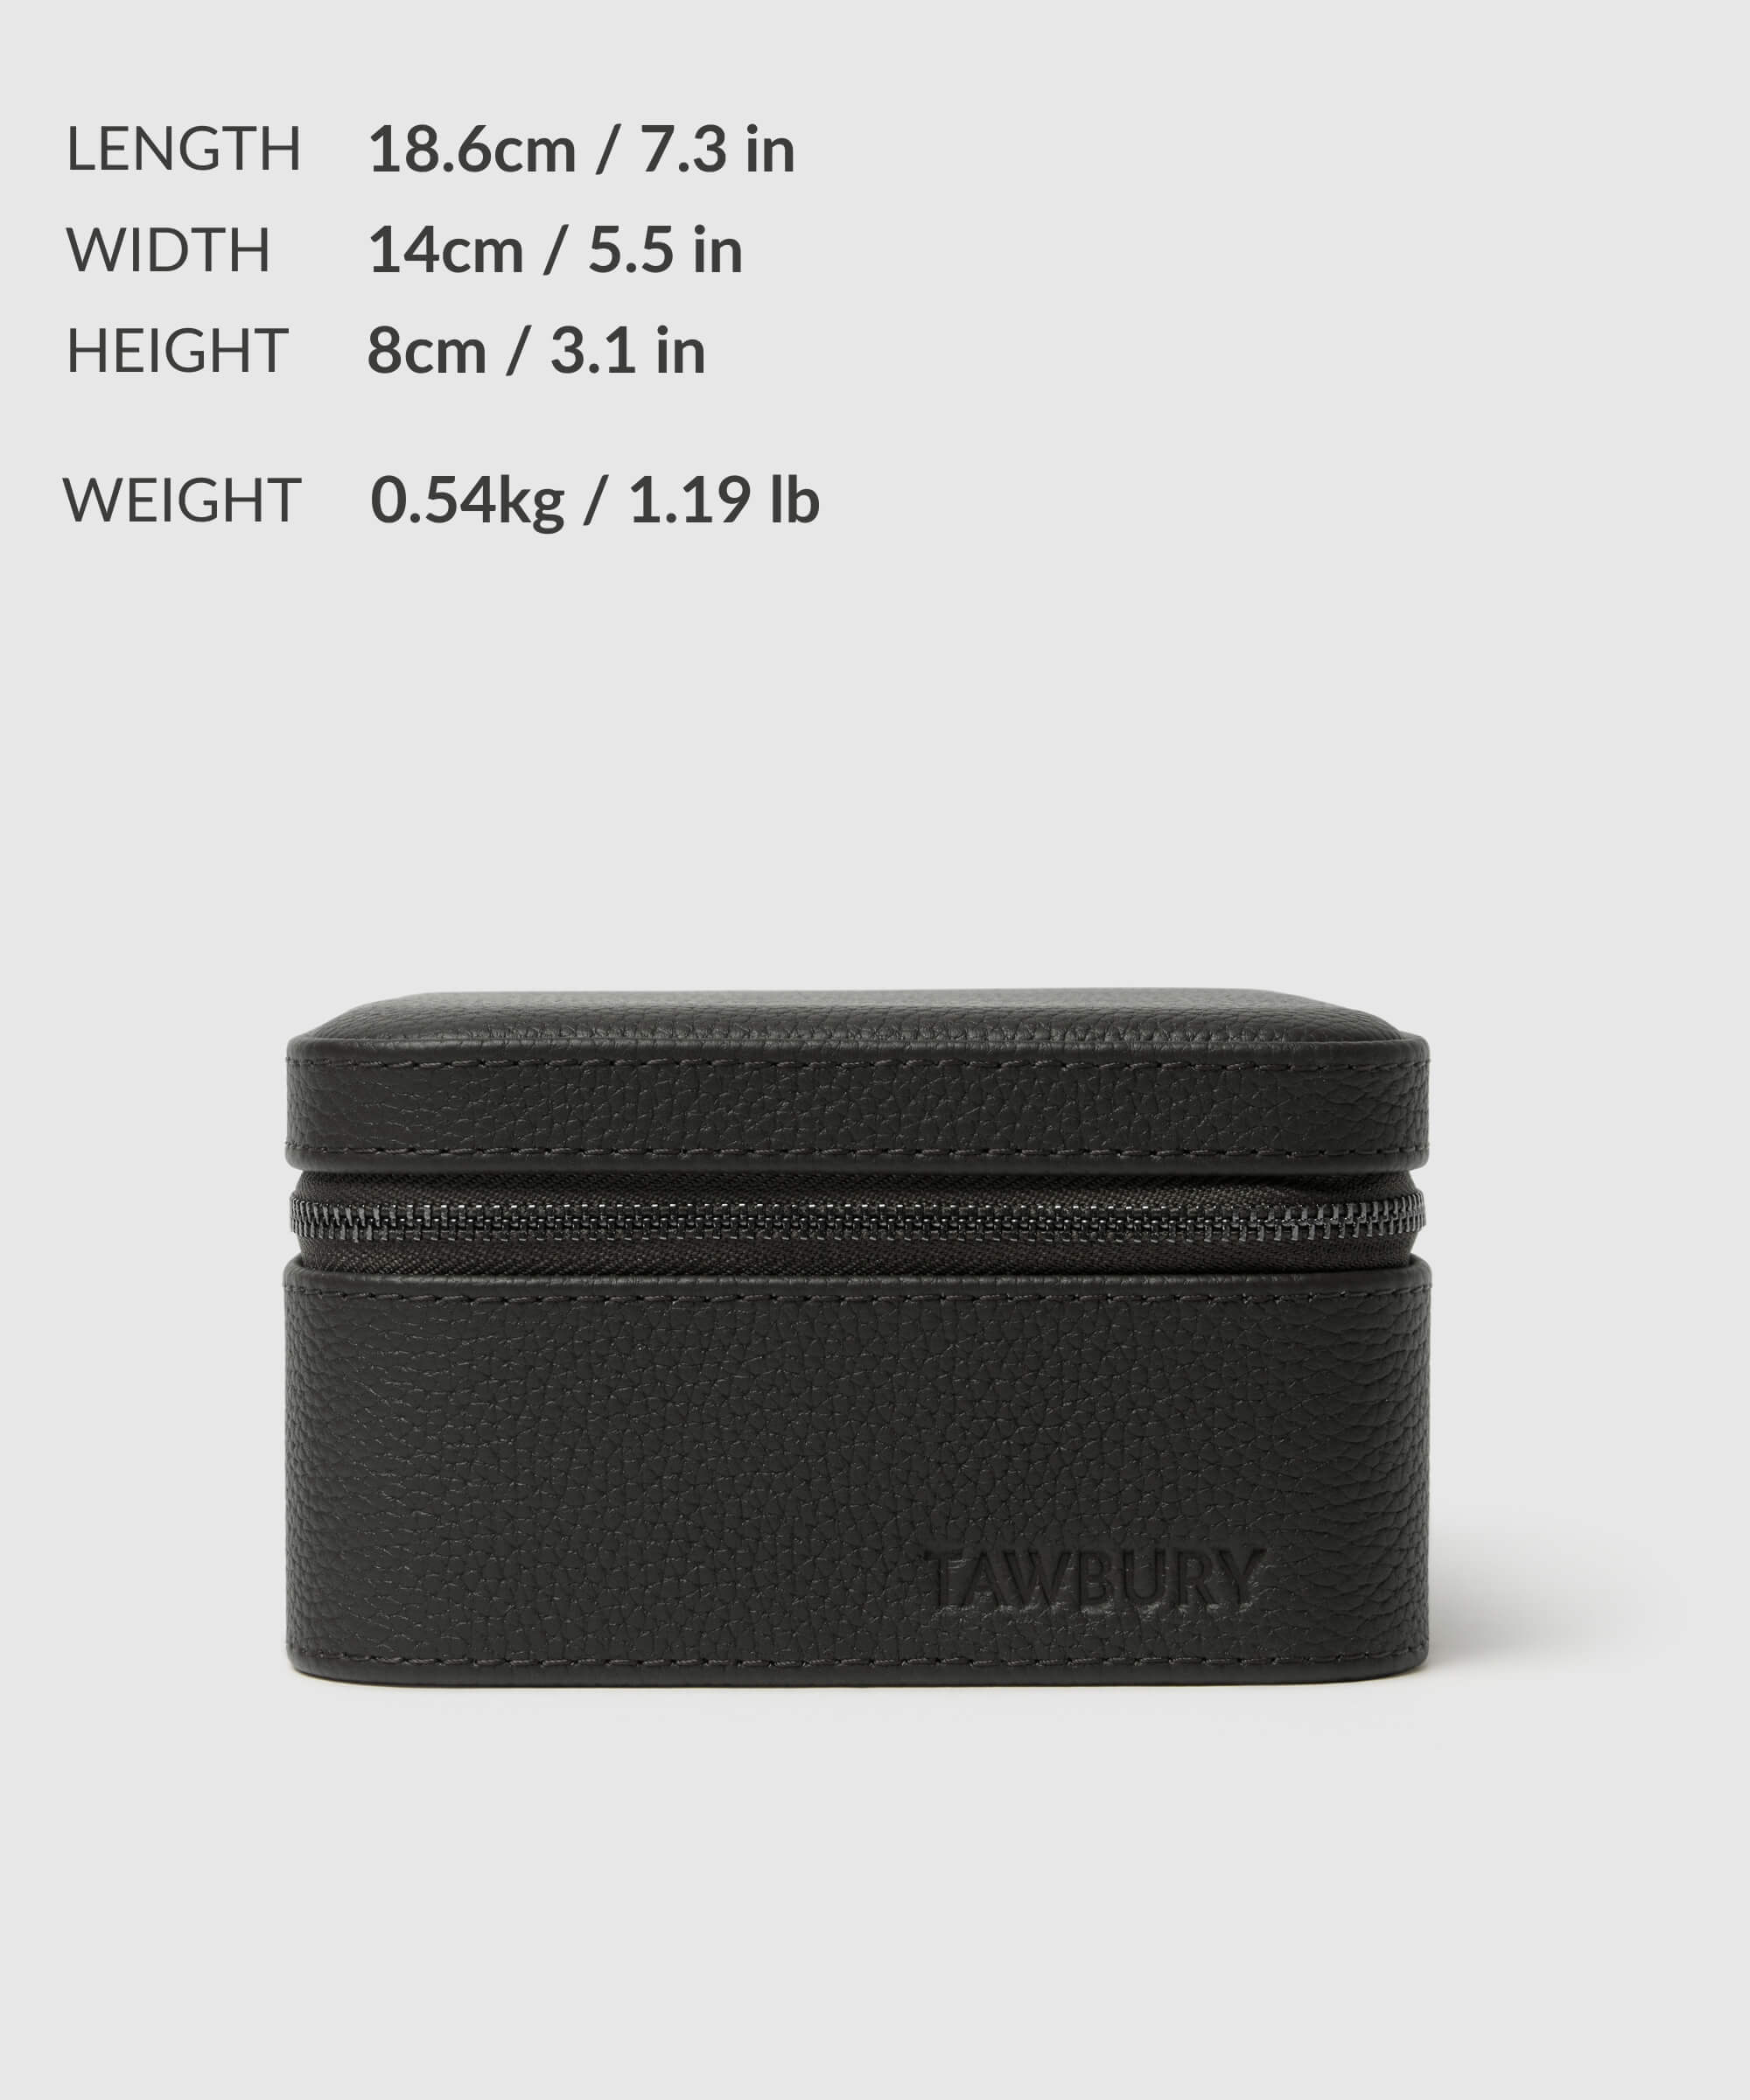 A black zippered case with the brand name "TAWBURY" embossed on it, designed as a luxury leather watch case. Perfect for watch storage, its dimensions are 18.6 cm x 14 cm x 8 cm and it weighs 0.54 kg.